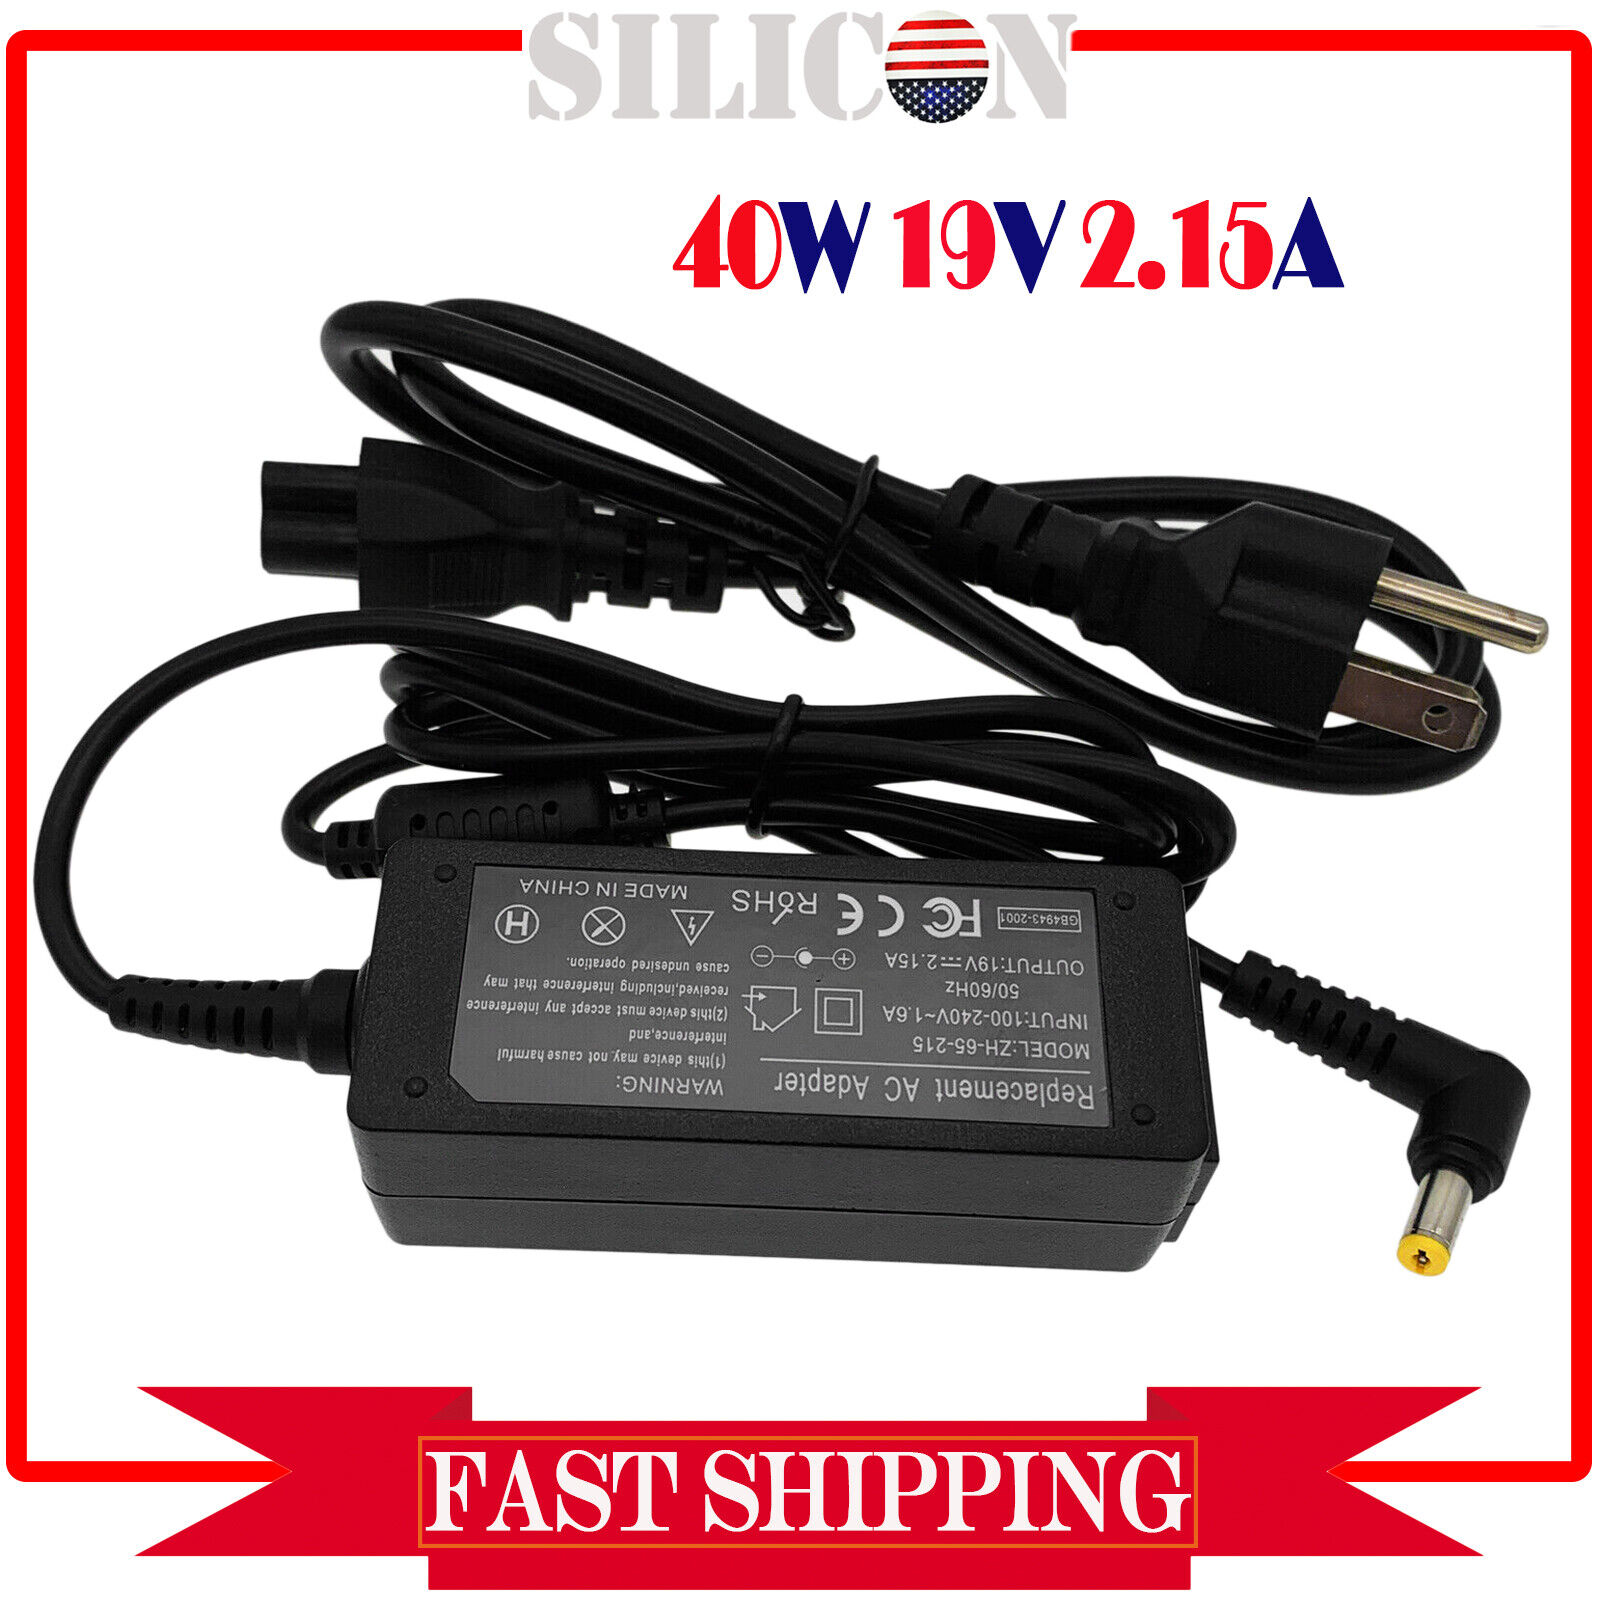 AC Adapter Power Supply Cord For Acer G227HQL G236HL G237HL LED LCD Monitor